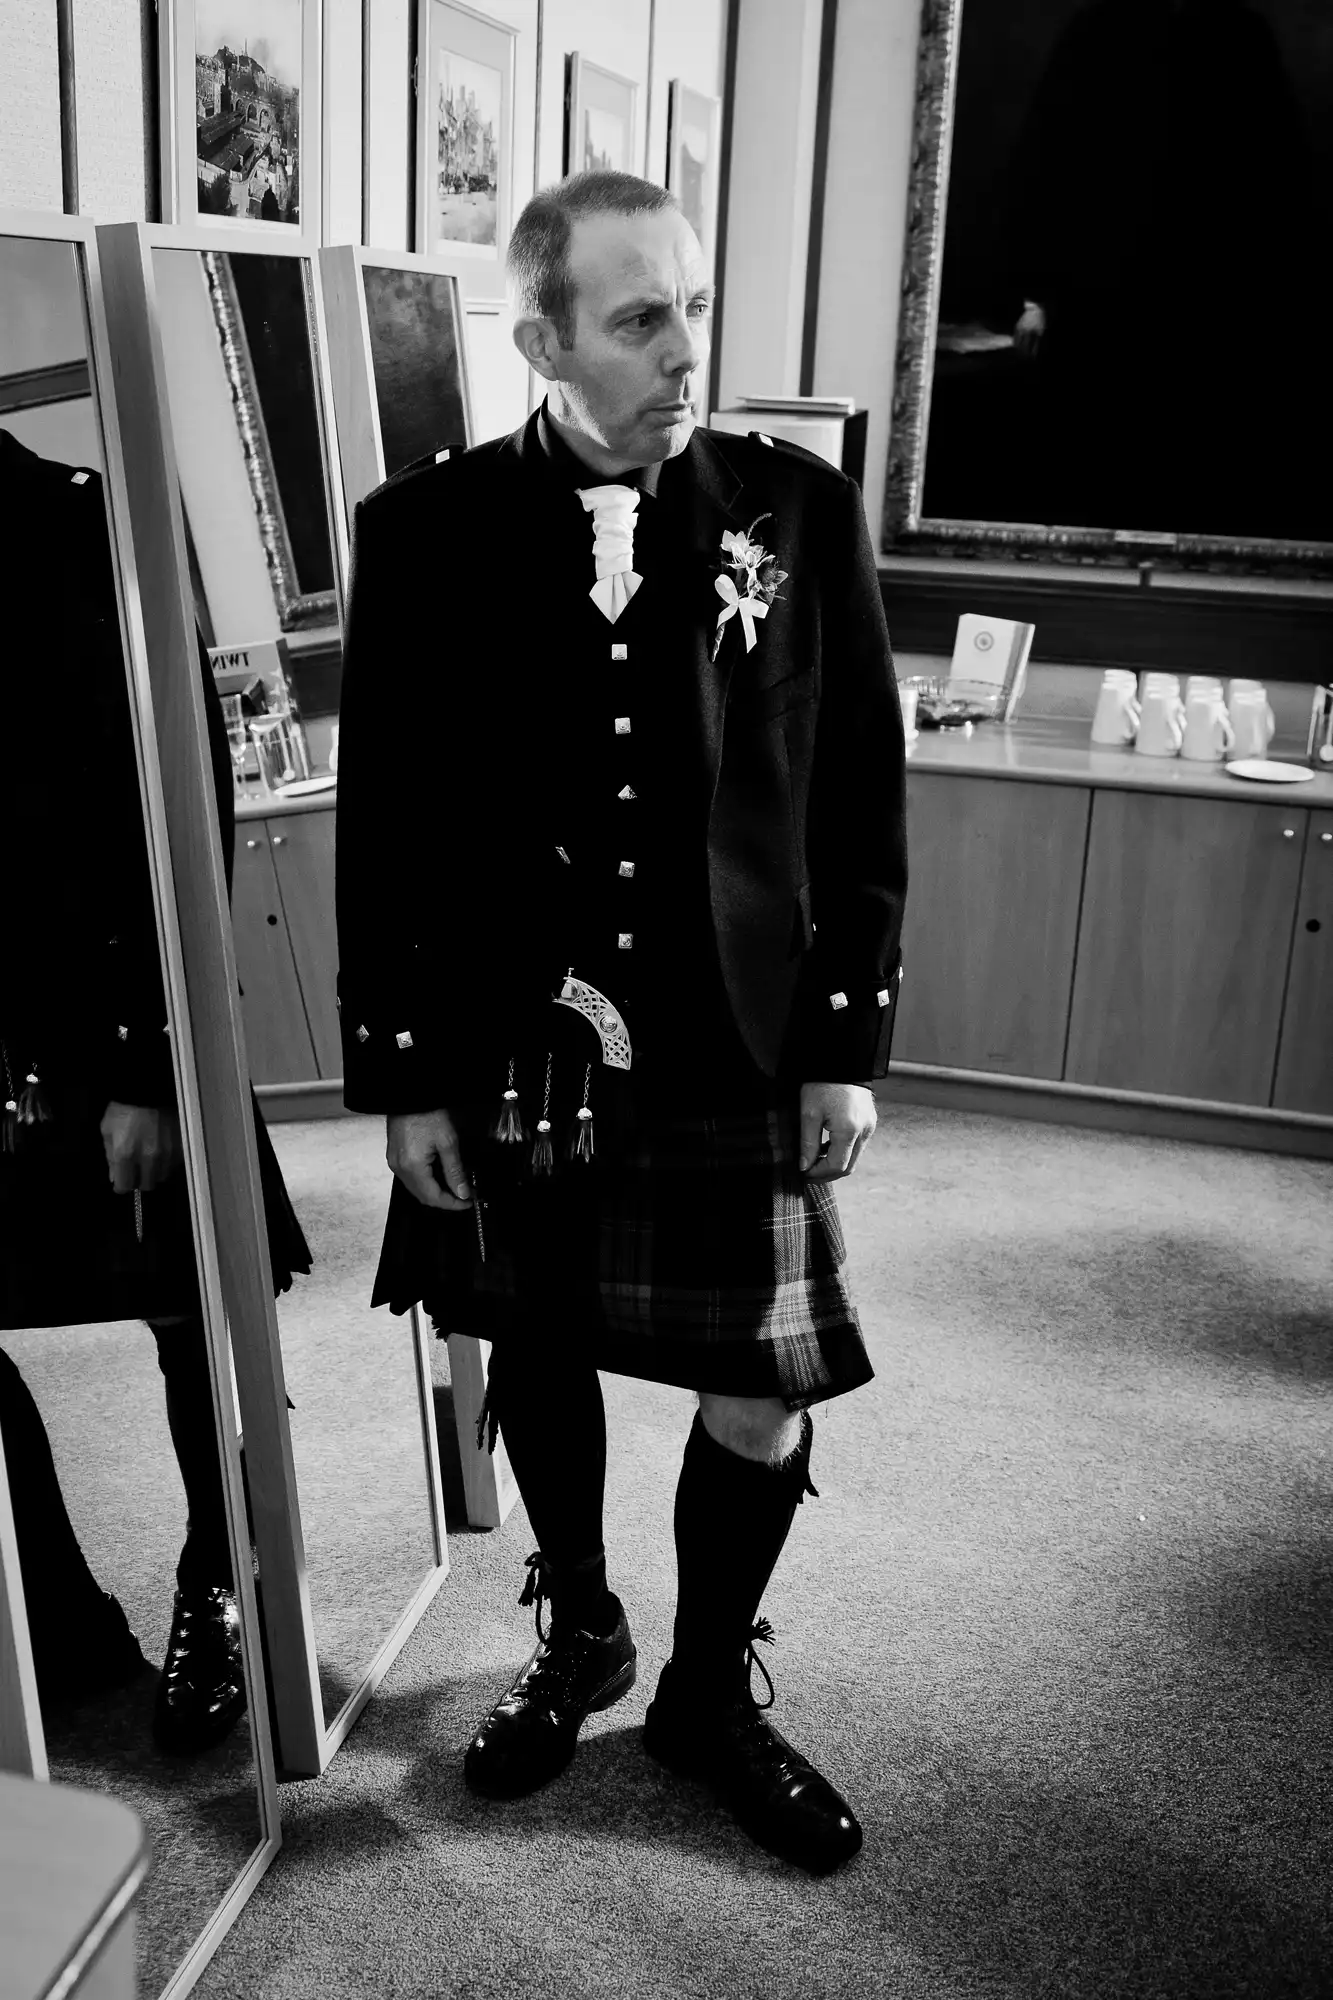 A man in a formal kilt outfit with a sash and medals stands pensively in front of a mirror in a black and white photo.